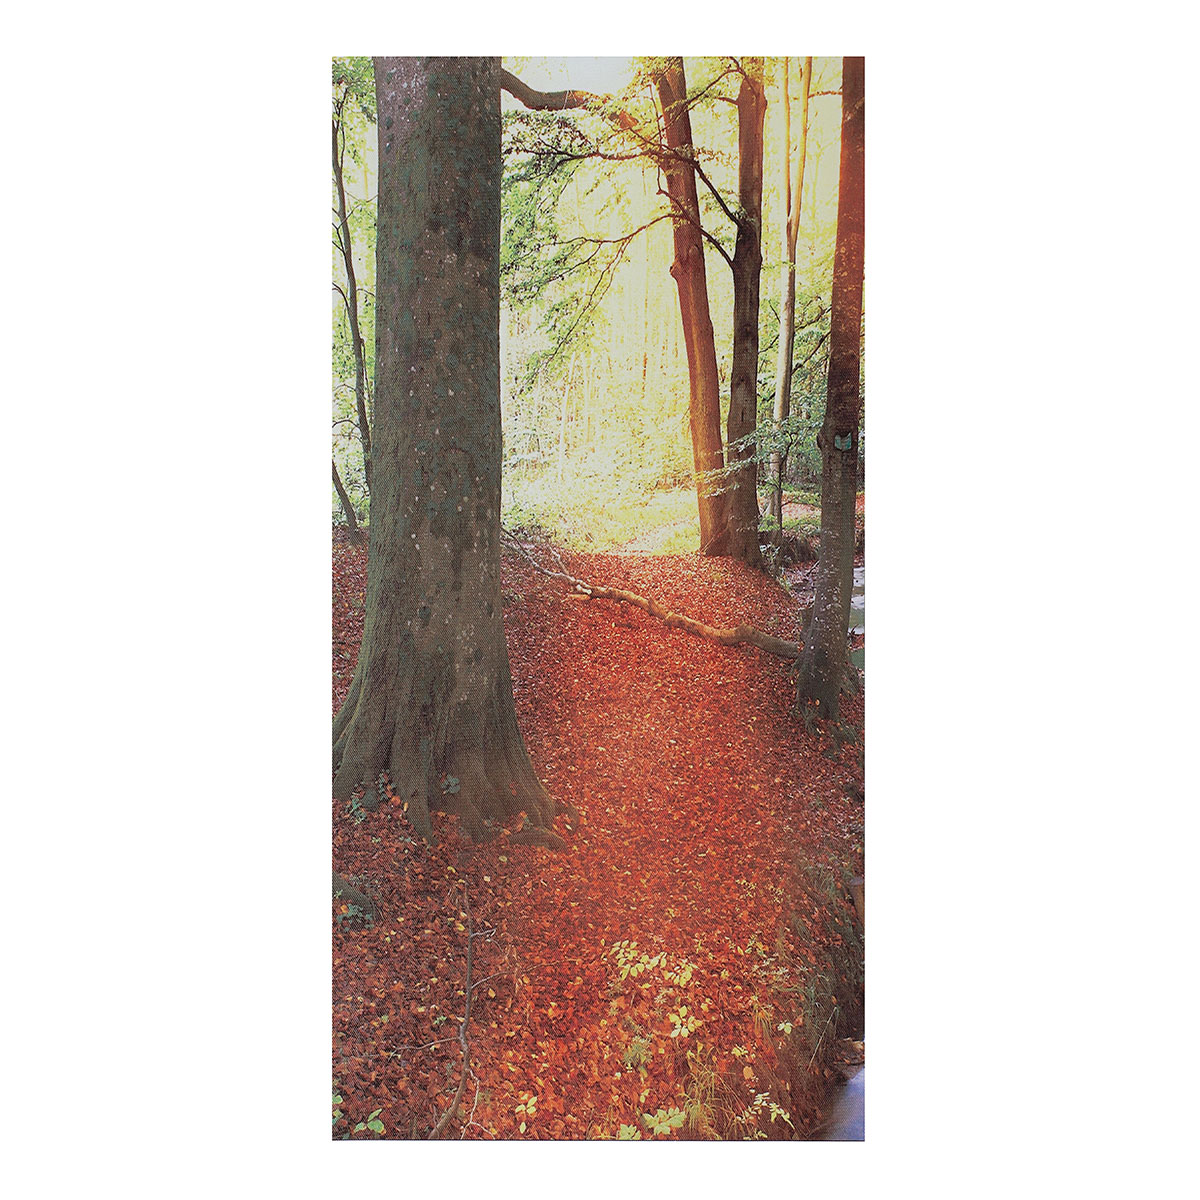 5Pcs-Modern-Autumn-Forest-Canvas-Print-Paintings-Poster-Wall-Art-Picture-Home-Decor-Unframed-1538687-9